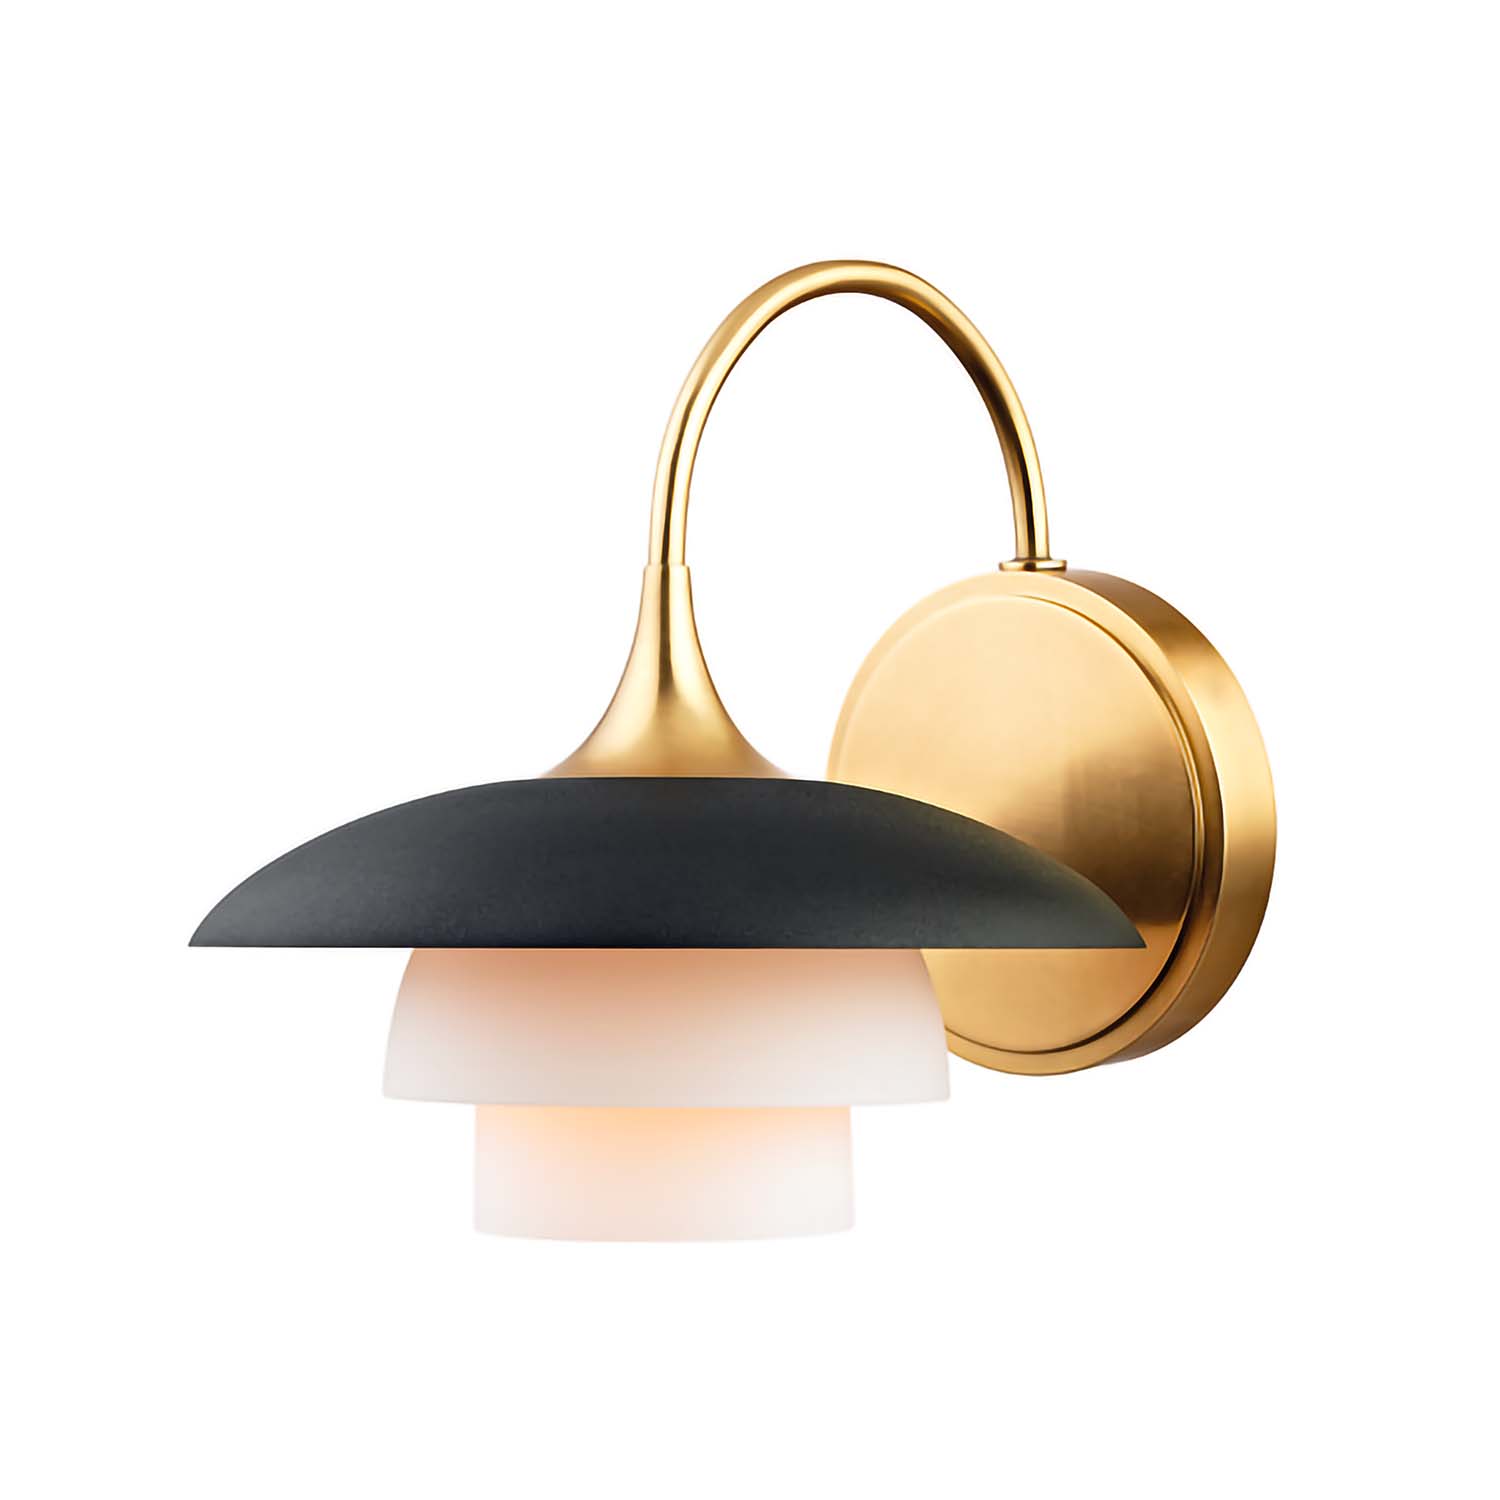 BARRON - Wall light in brass and glass shade